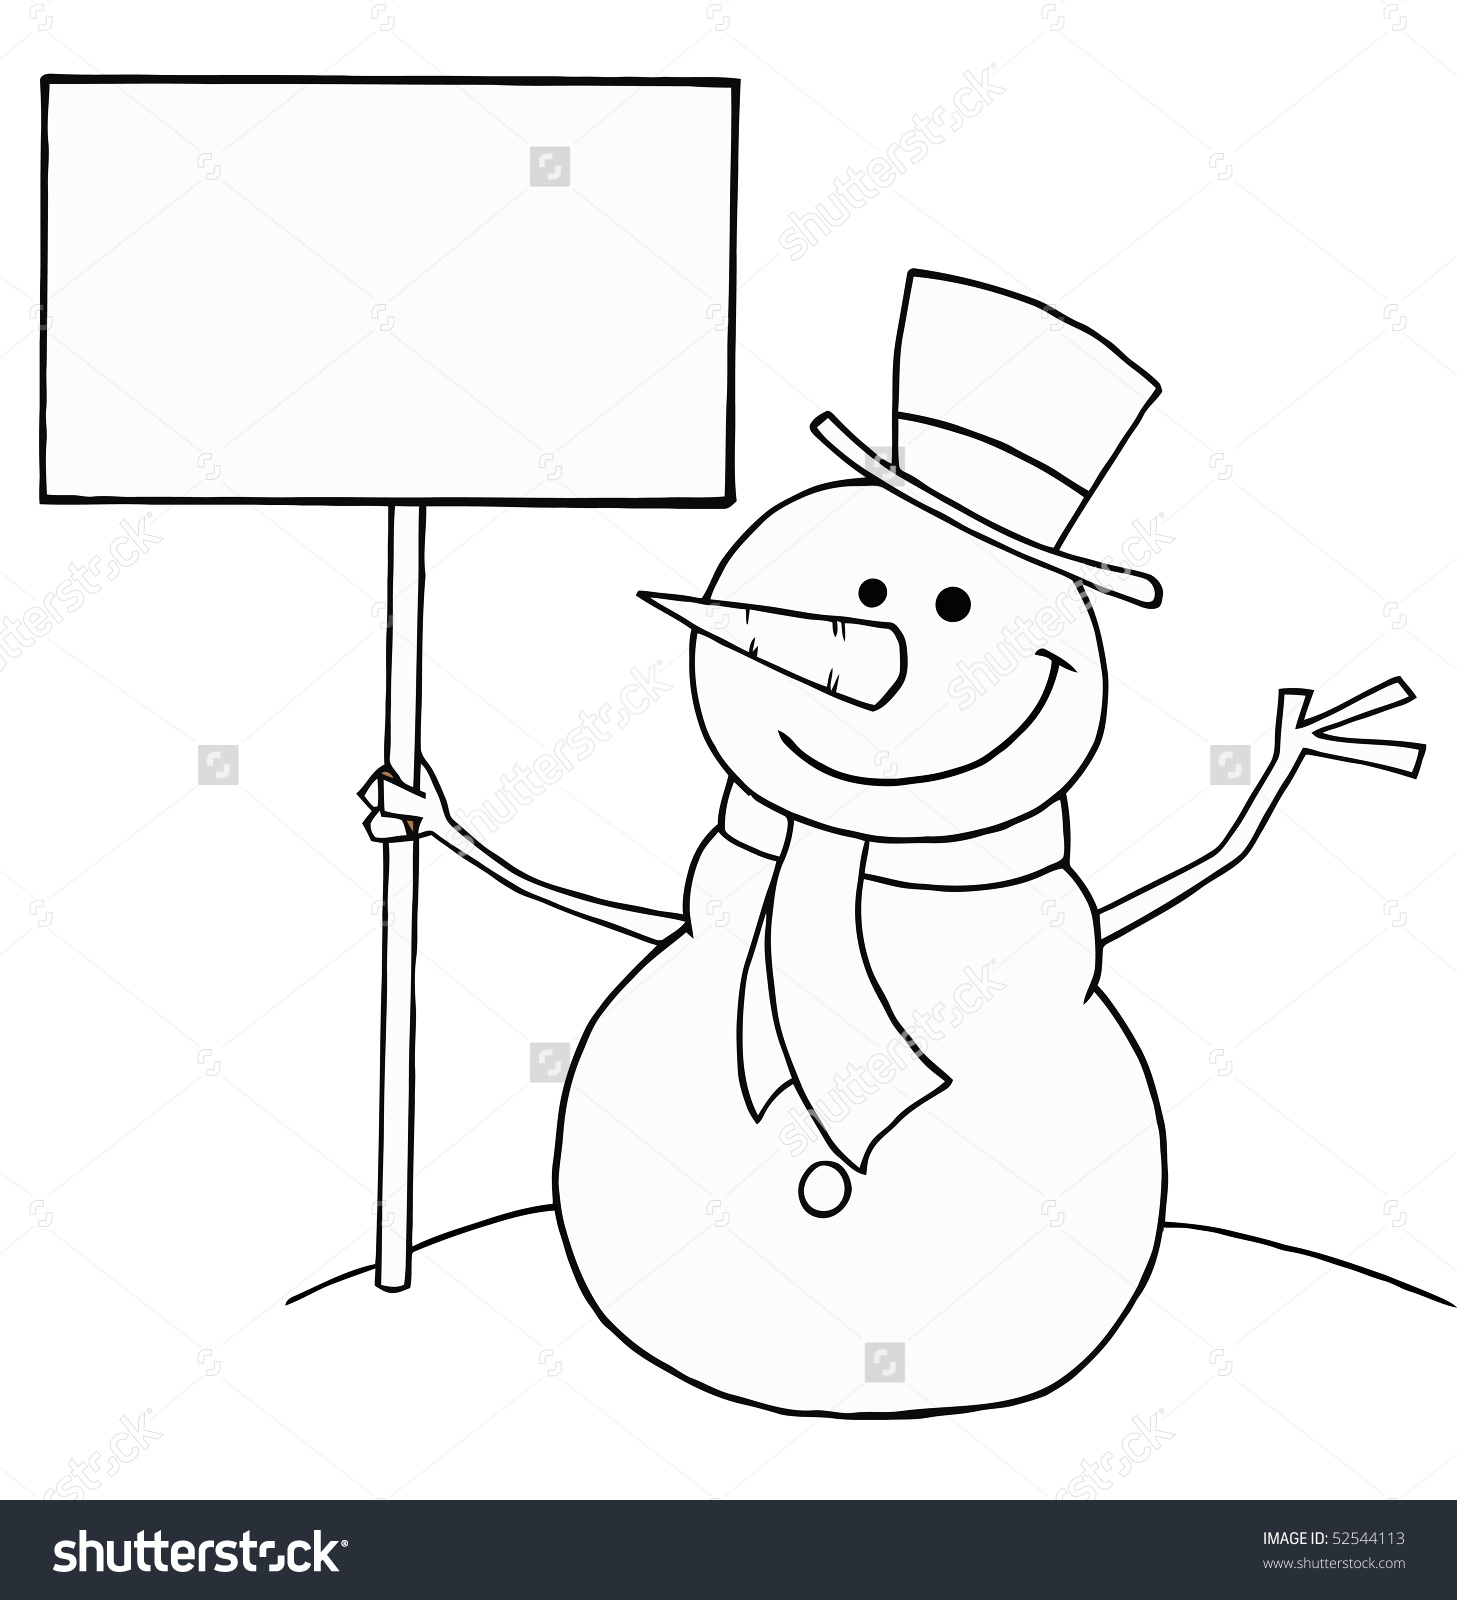 Black White Coloring Page Outline Snowman Stock Vector 52544113.